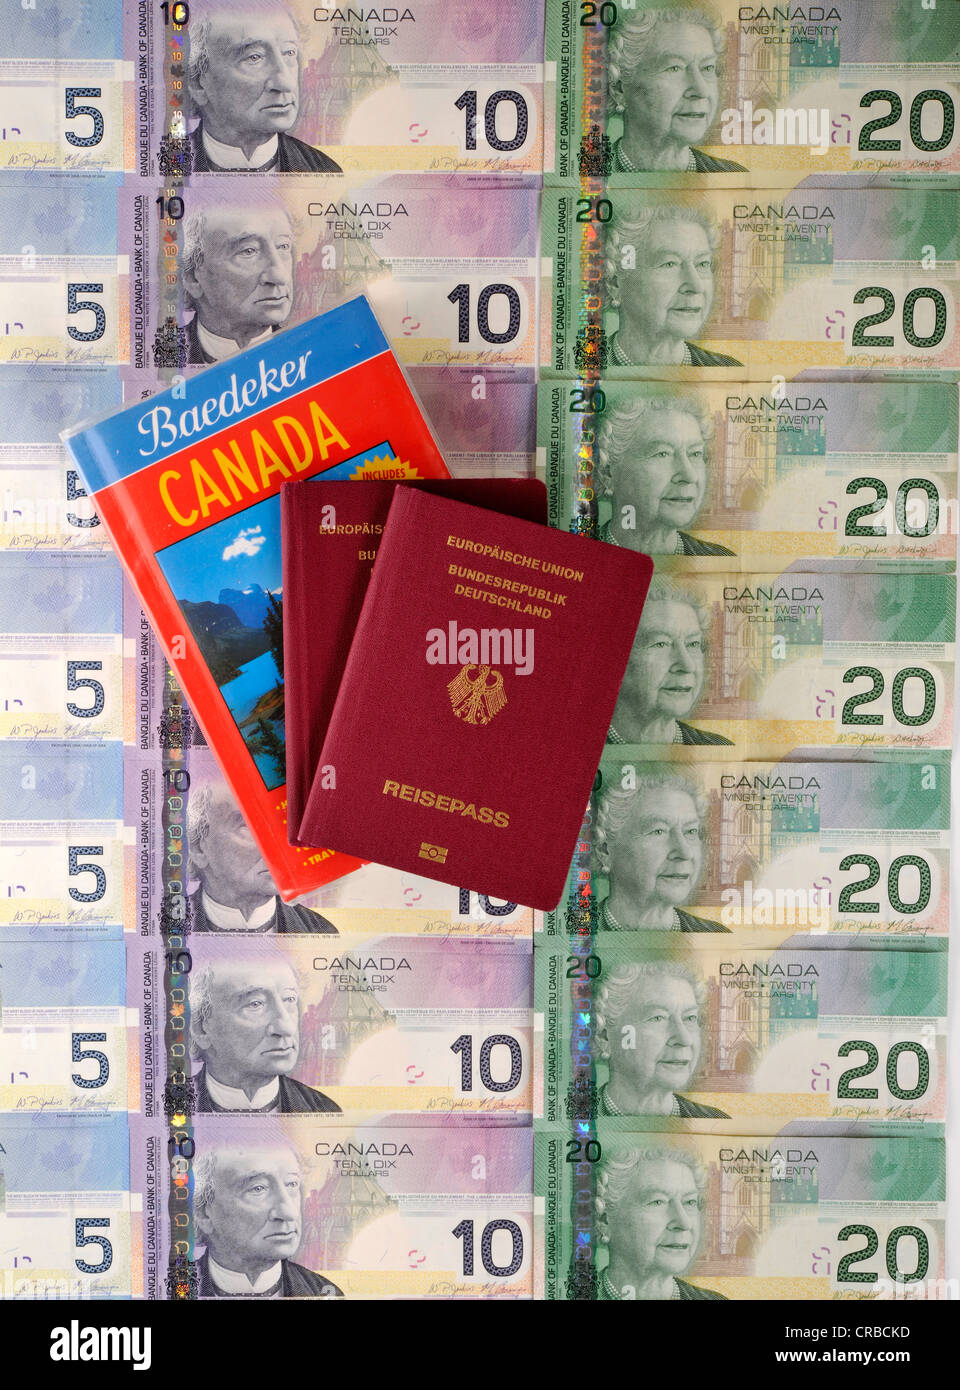 Passport of the Federal Republic of Germany, guide book for Canada, various Canadian dollar banknotes Stock Photo